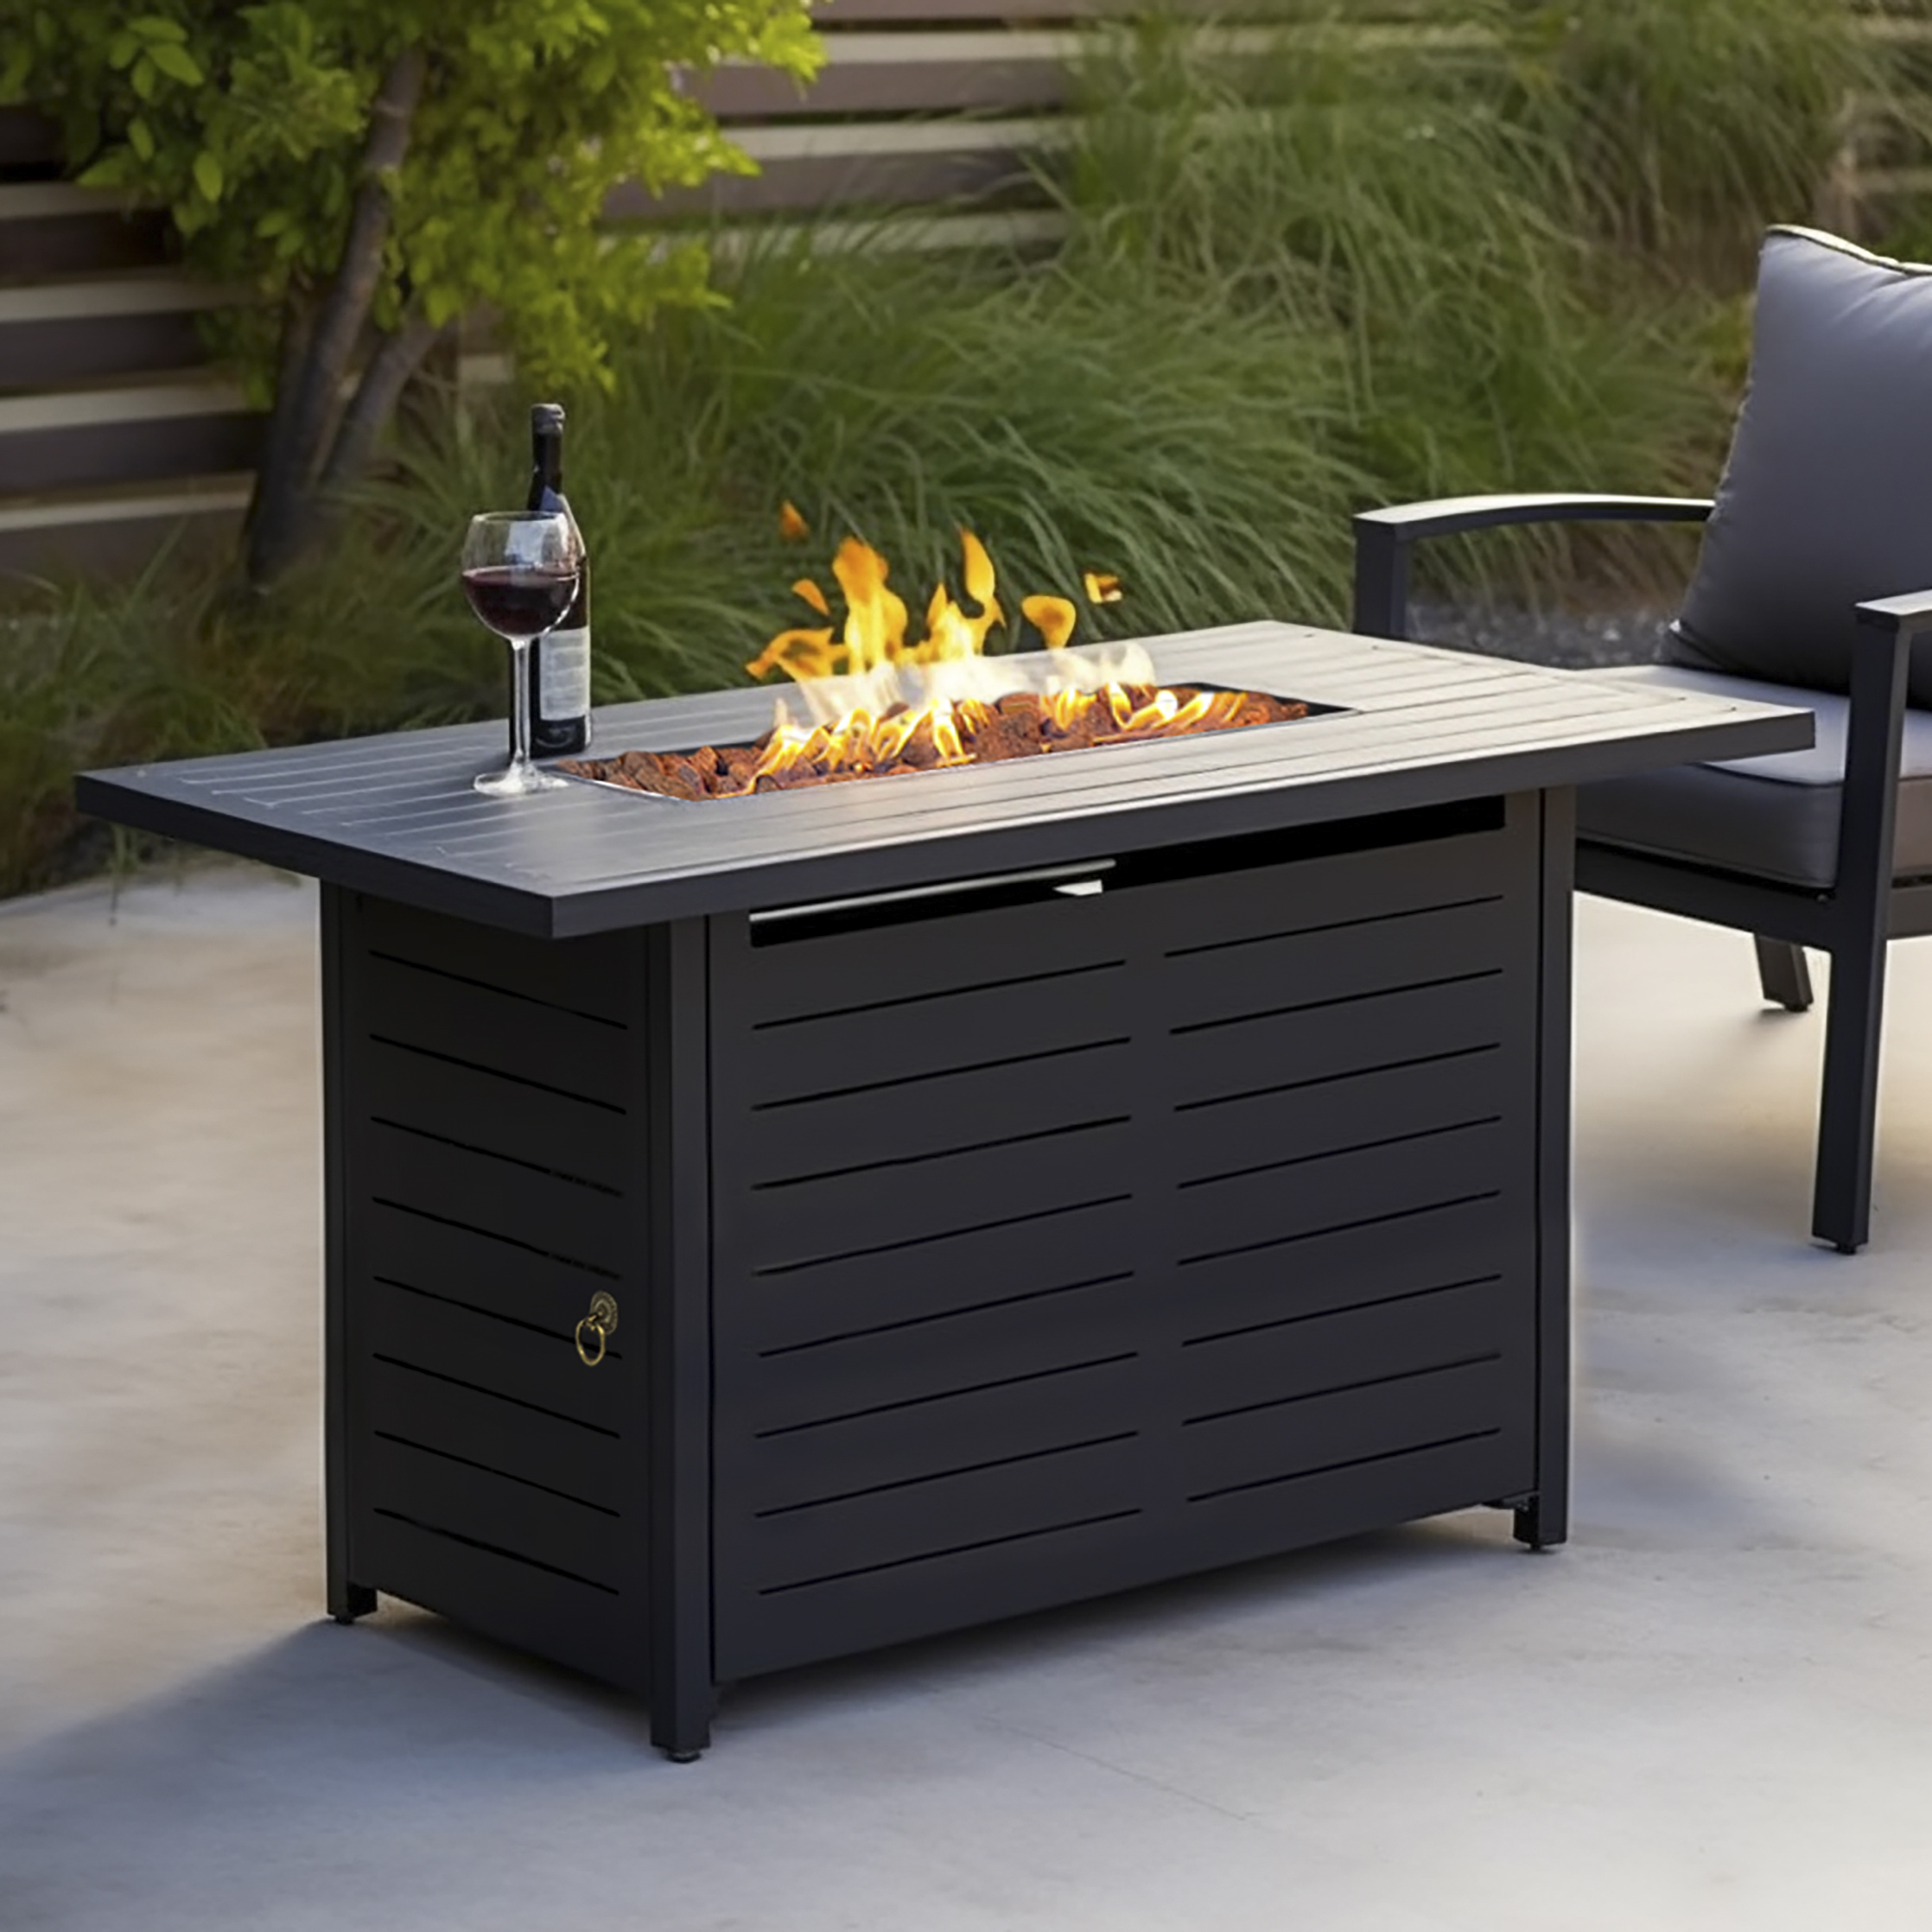 Kinger Home 42 inch Outdoor Propane Fire Pit Table for Patio, 50,000 BTU CSA Certified, Aluminum Frame, Lid, Weather Cover, Lava Rocks - image 2 of 9